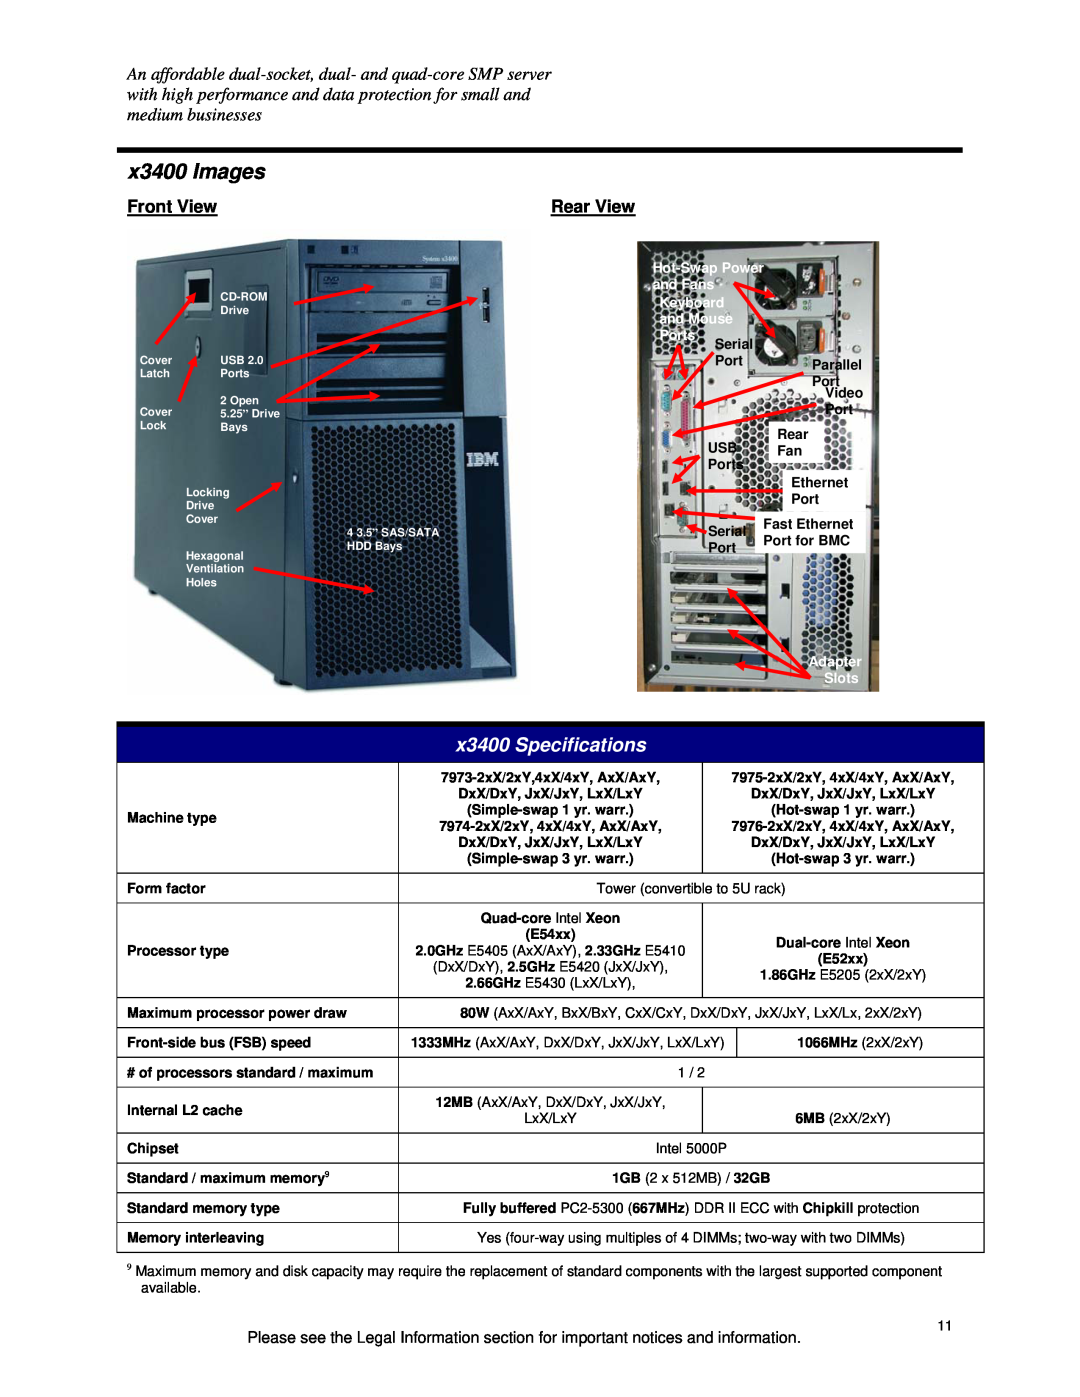 IBM specifications x3400 Images, x3400 Specifications, Front View, Rear View, Hot-SwapPower, and Fans, and Mouse, Ports 